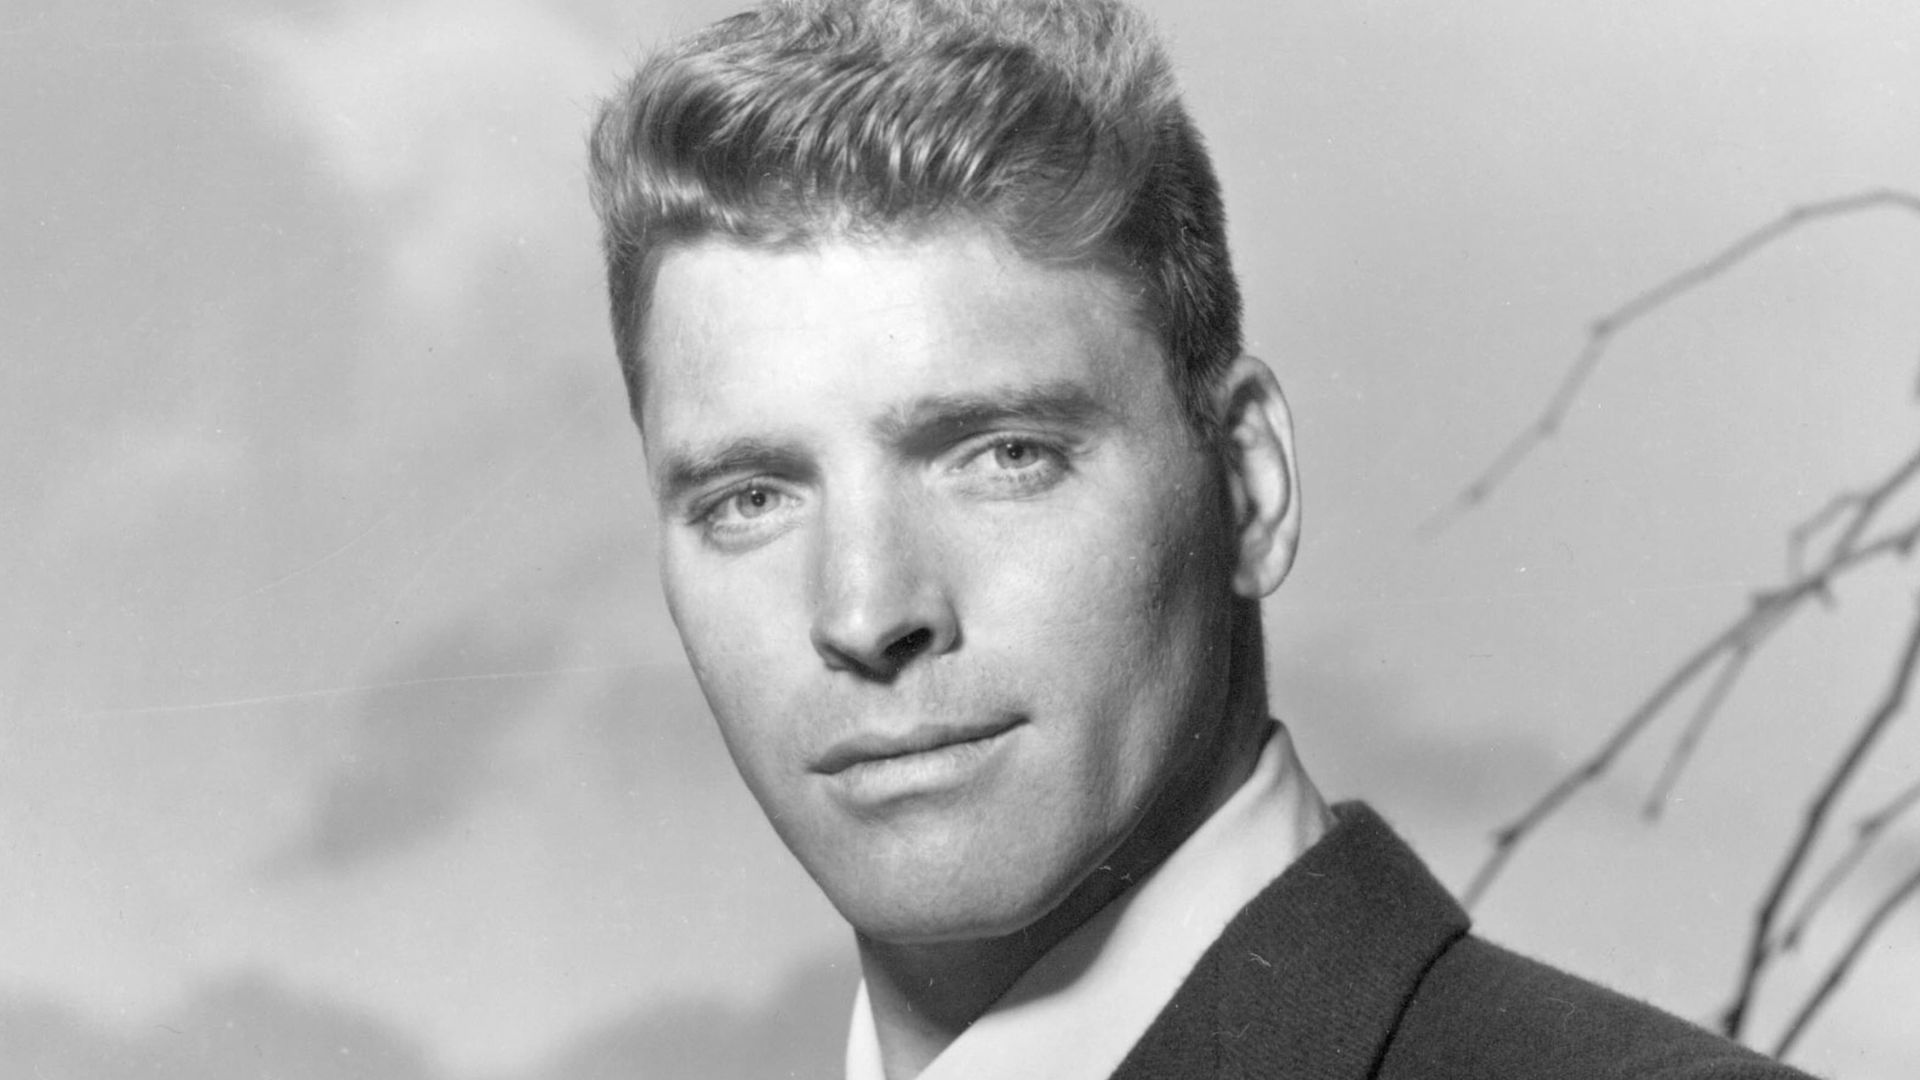 Burt Lancaster - An Actor And Former Circus Performer Who Rose To Fame In Hollywood